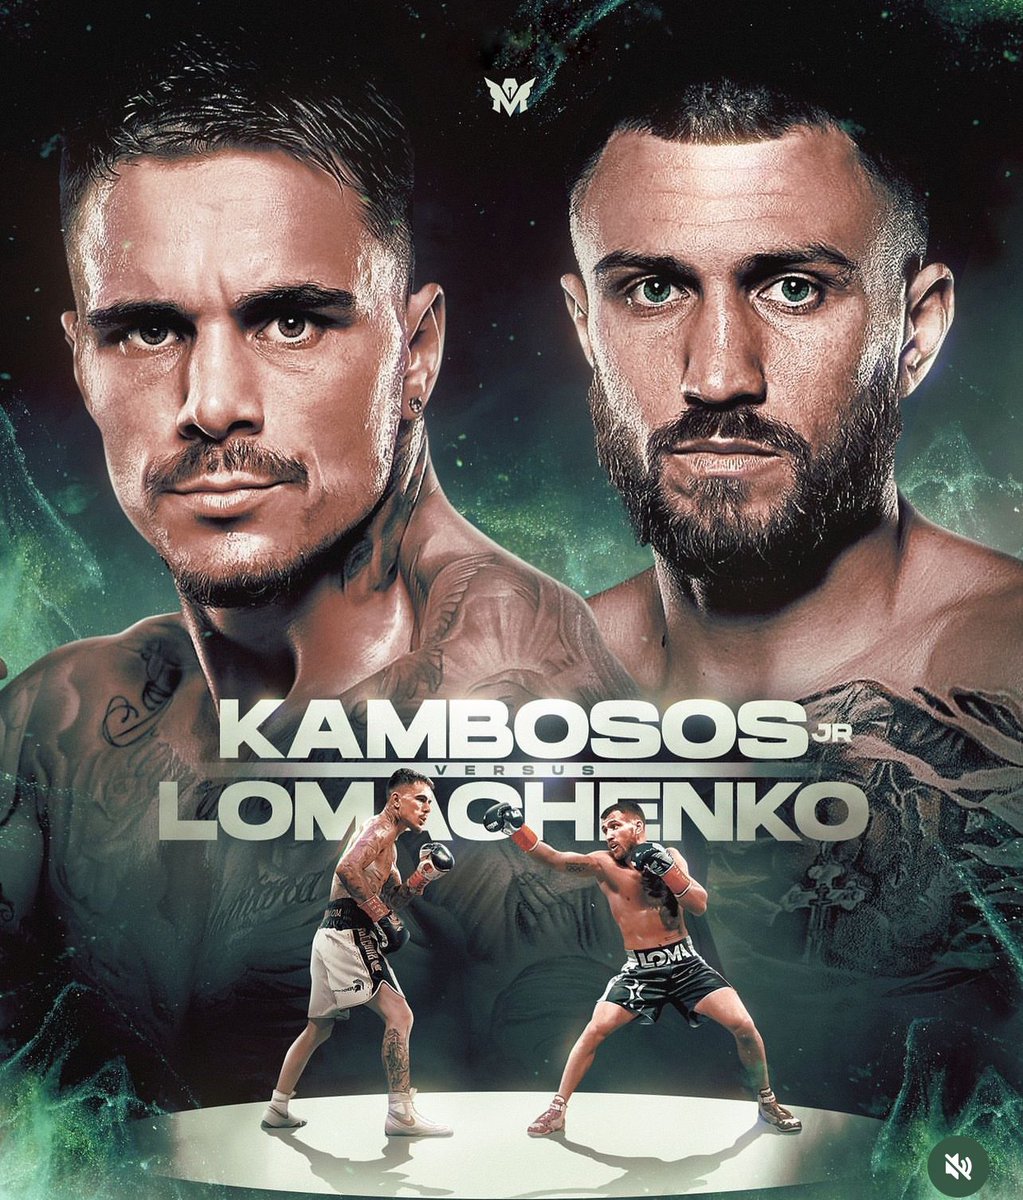 The skills that Loma possess are phenomenal, but the desire @georgekambosos has is unquestionable. Looking forward to a sensational fight between to class operators.